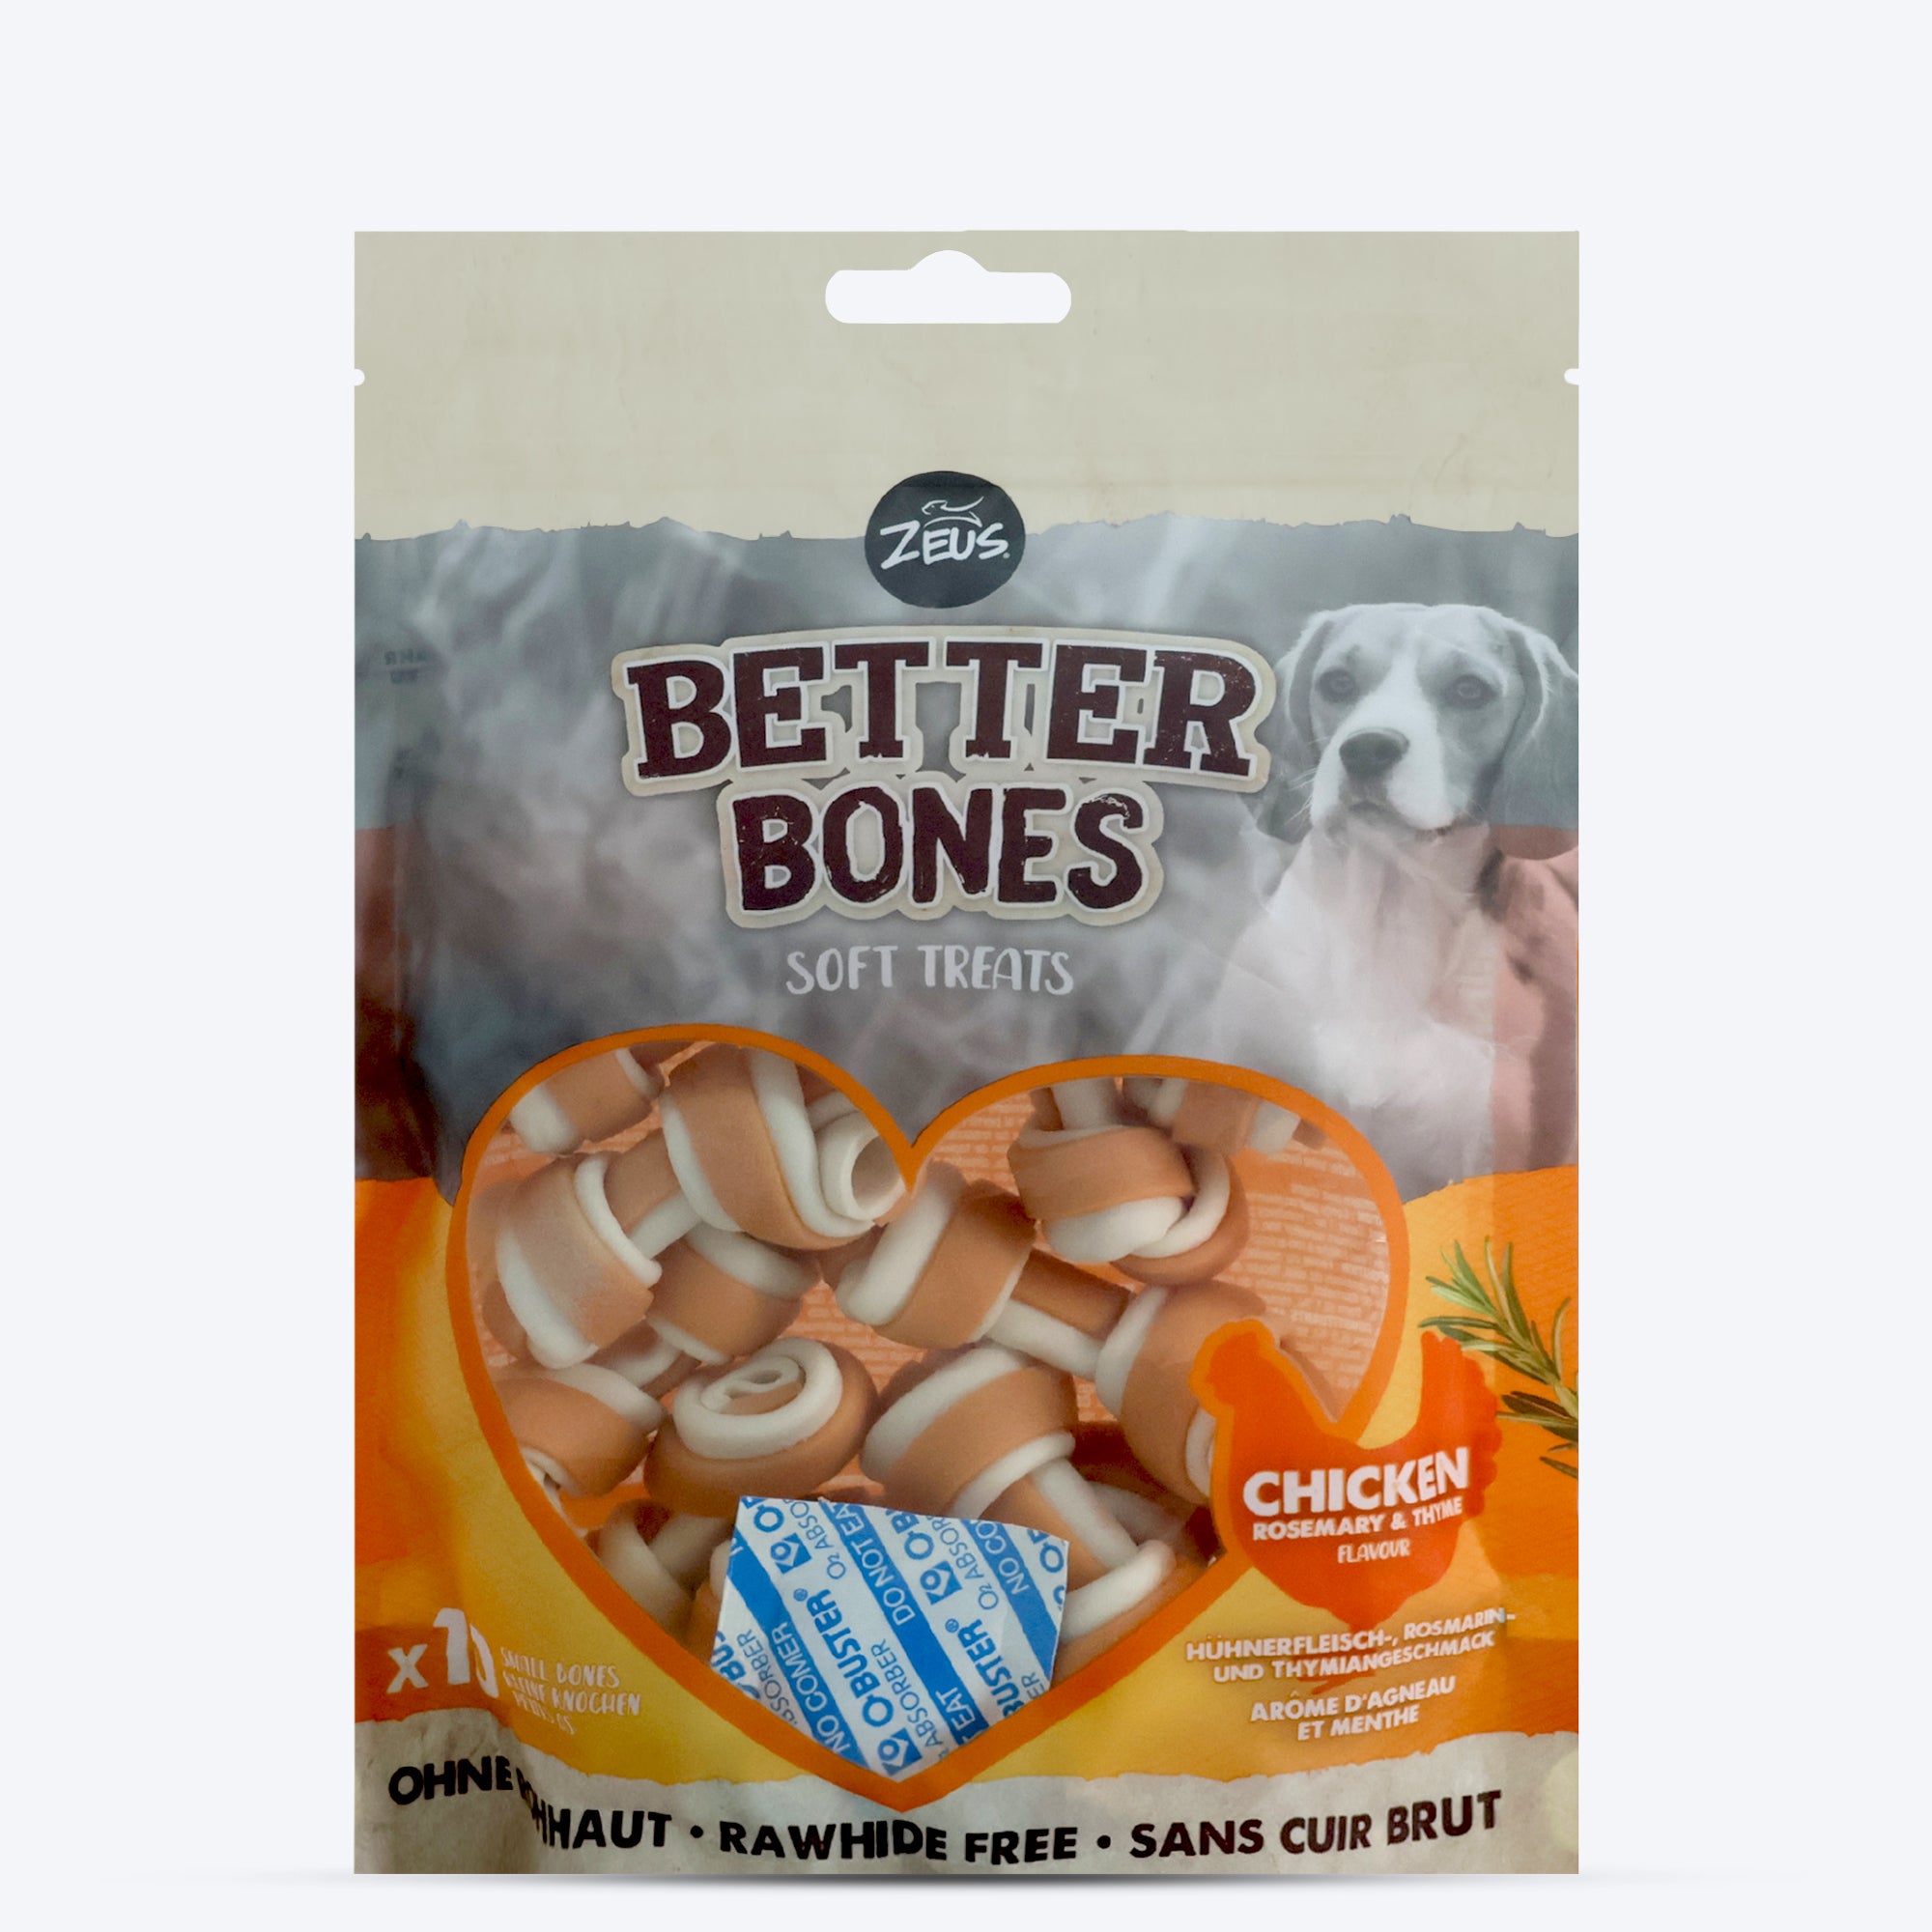 

Zeus Better Bones Chicken Rosemary & Thyme Soft Treat For Dogs - 219 gm (10 pcs)